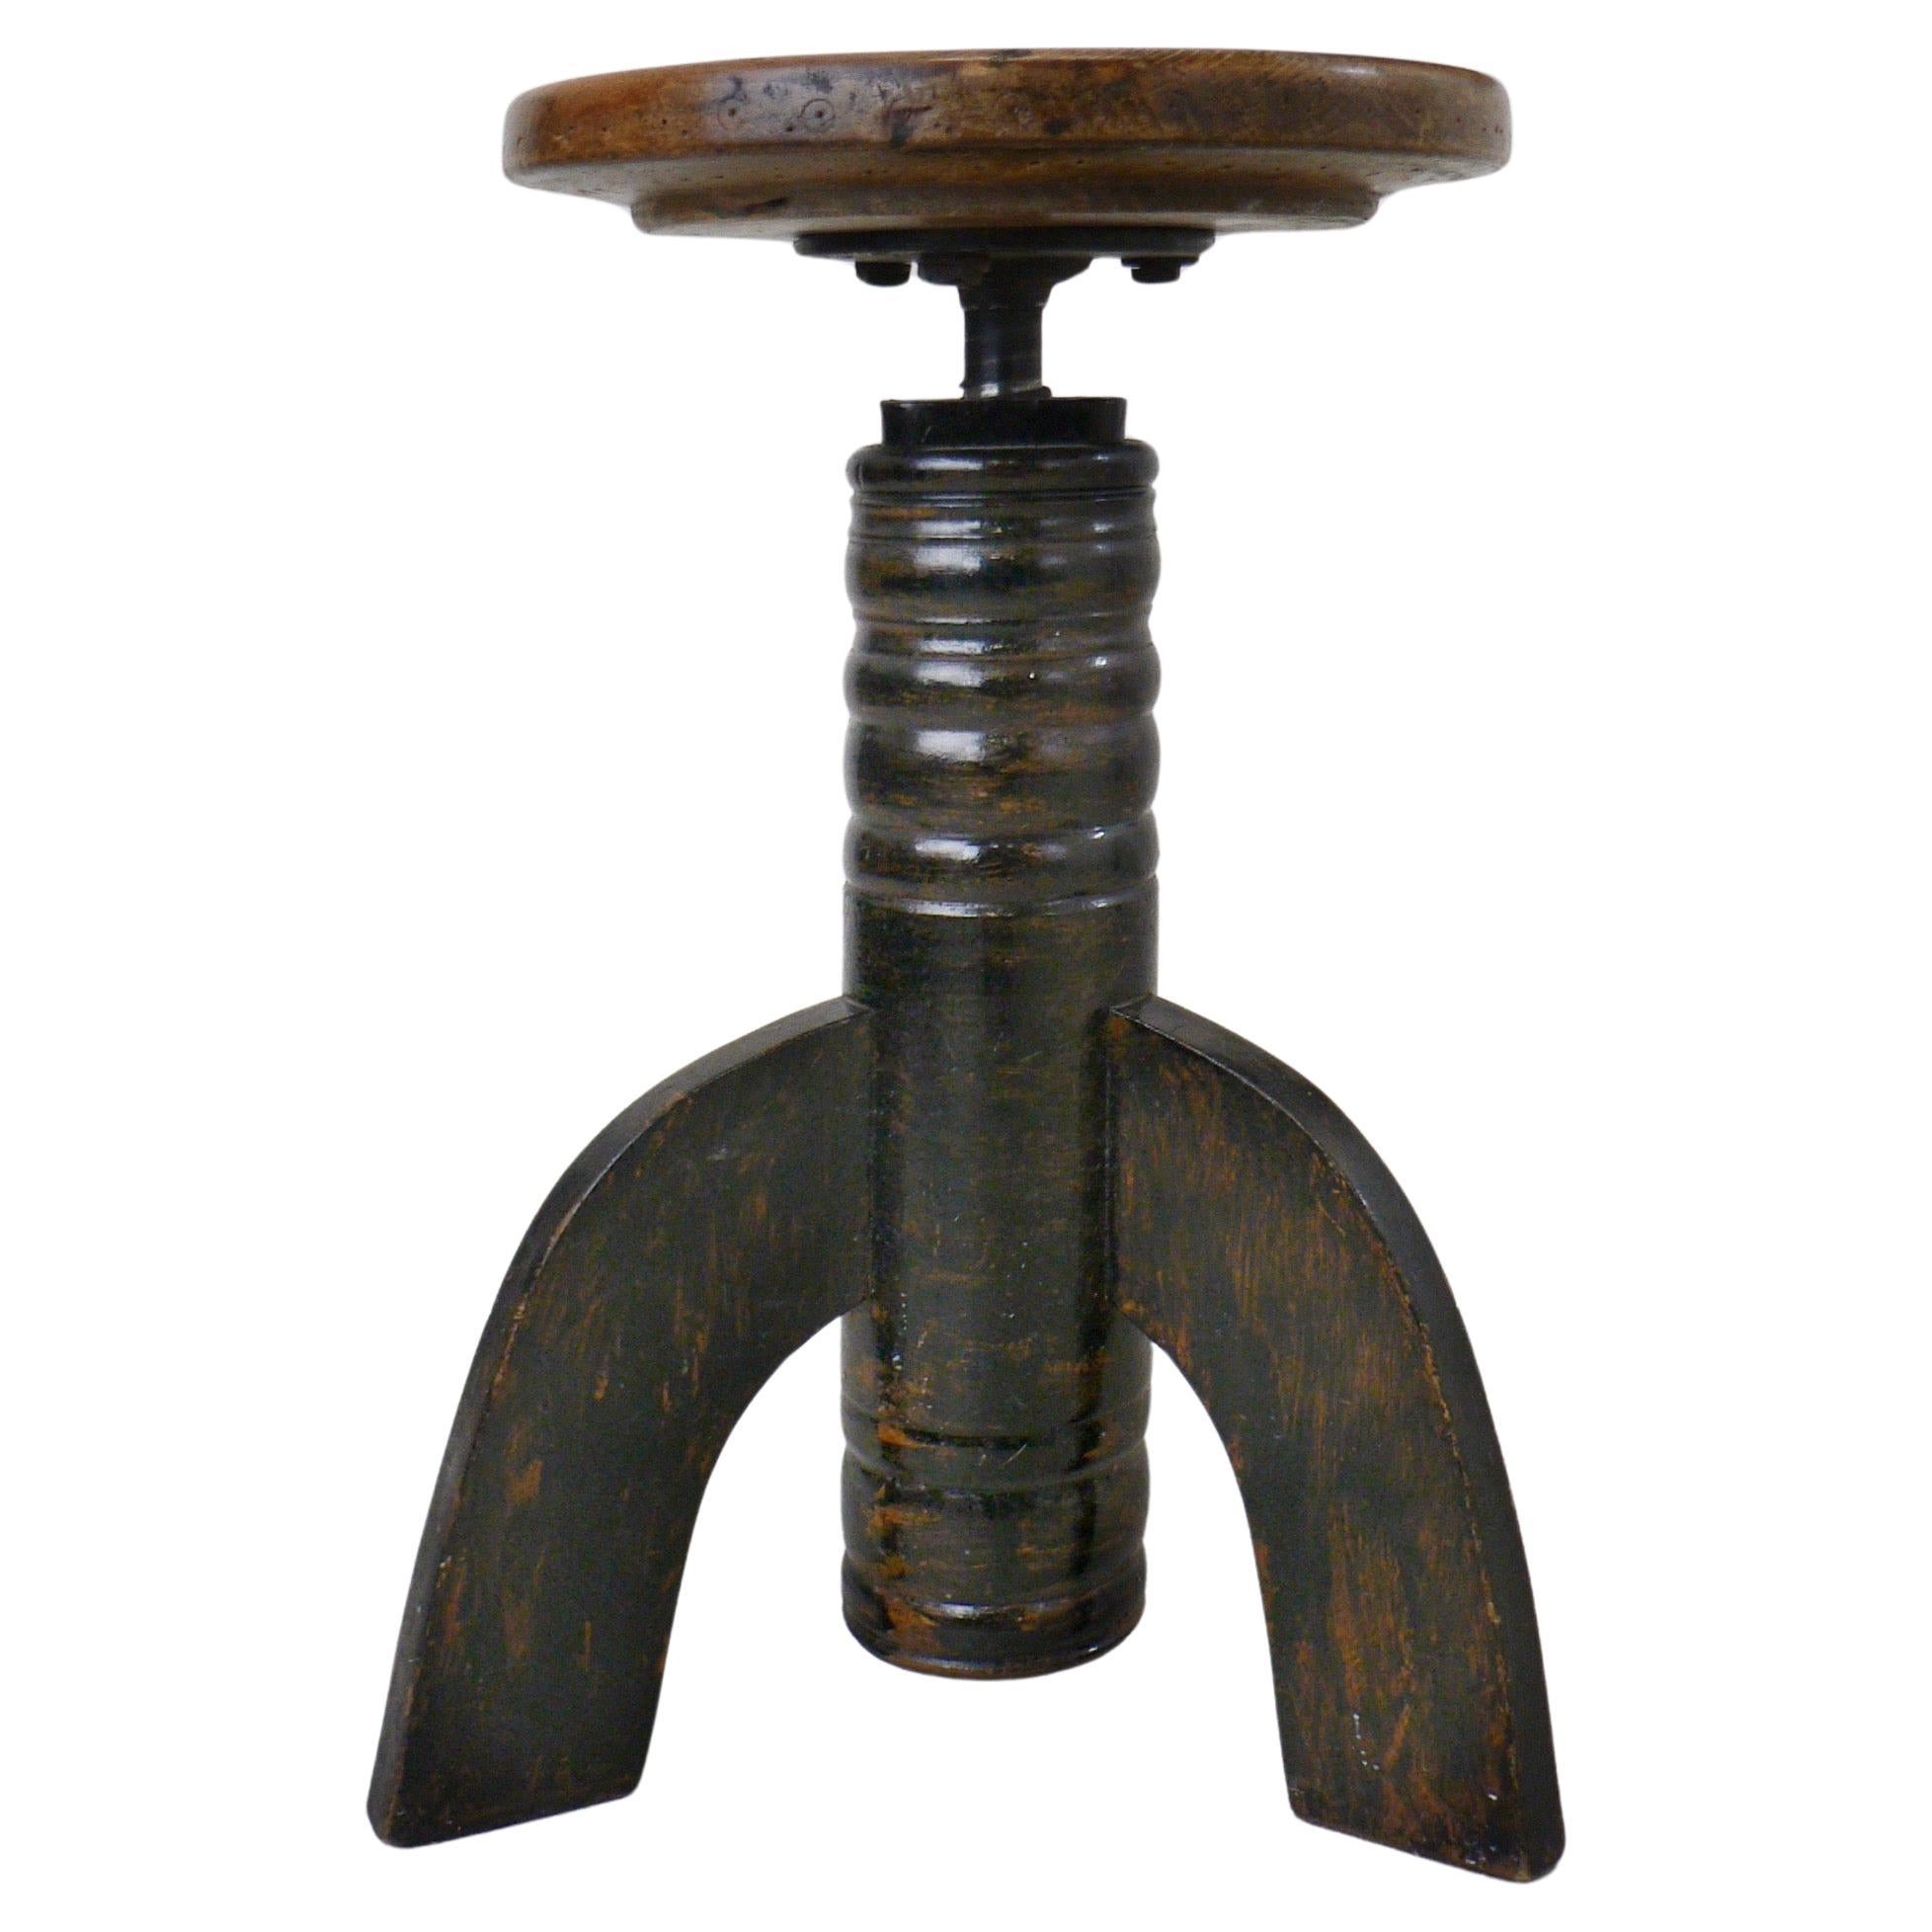 A swiveling, height-adjustable, tripod stool from early 20th-century France.